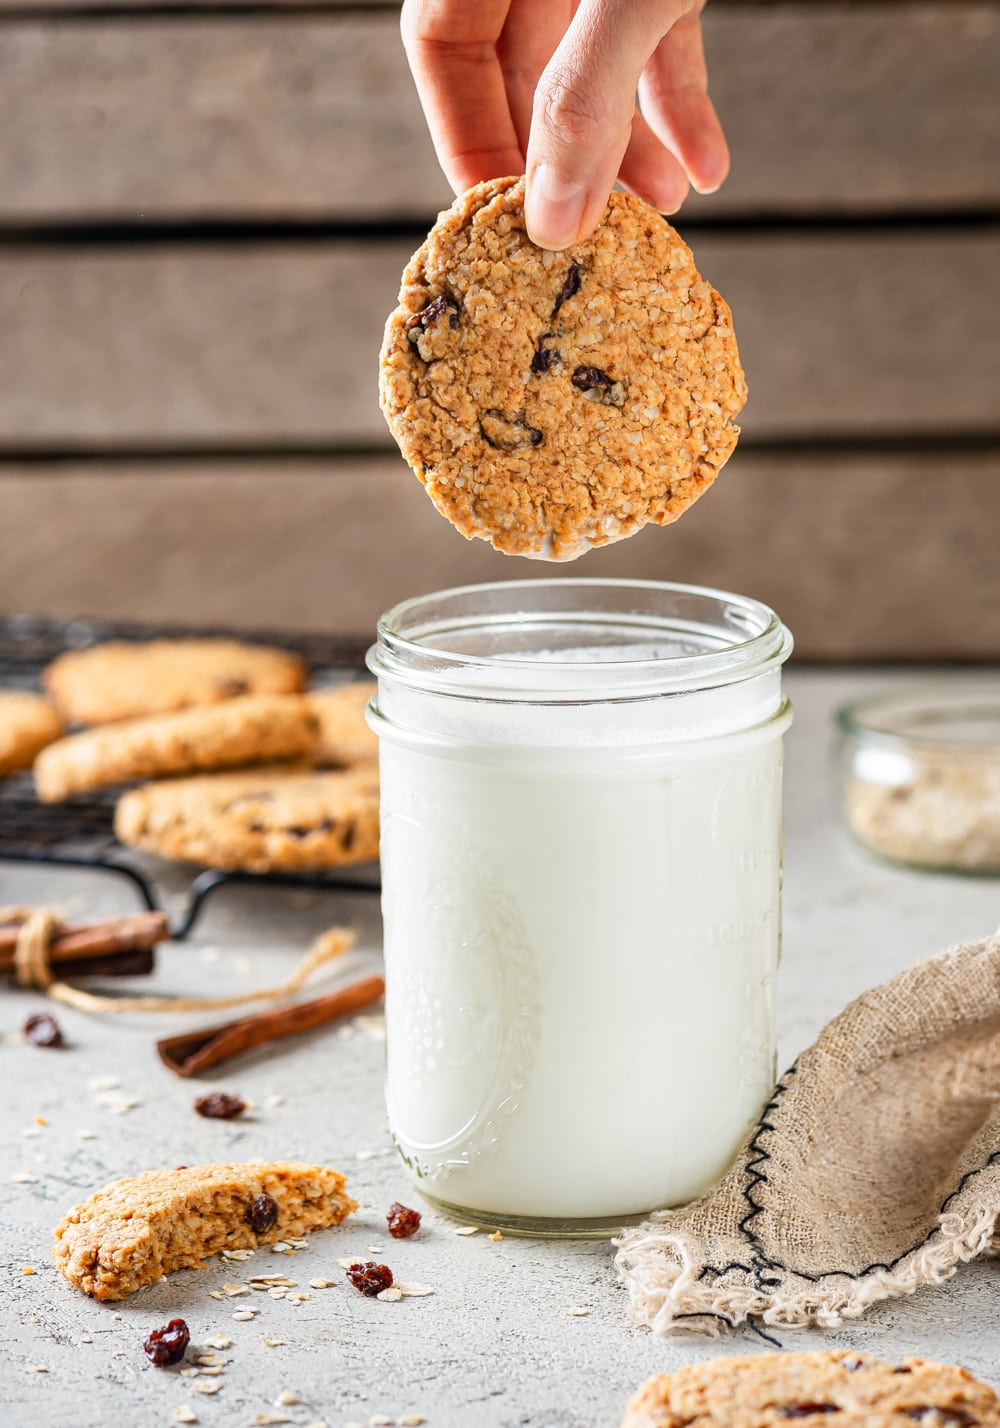 One vegan oatmeal raisin cookie being lowered down by a hand, just hovering above a glass jar of milk. A few cookies are on a black wire rack set behind and the to the left of the jar of milk. One half of a broken cookie is next to the jar of milk to the left and a yarn towel is to the right.